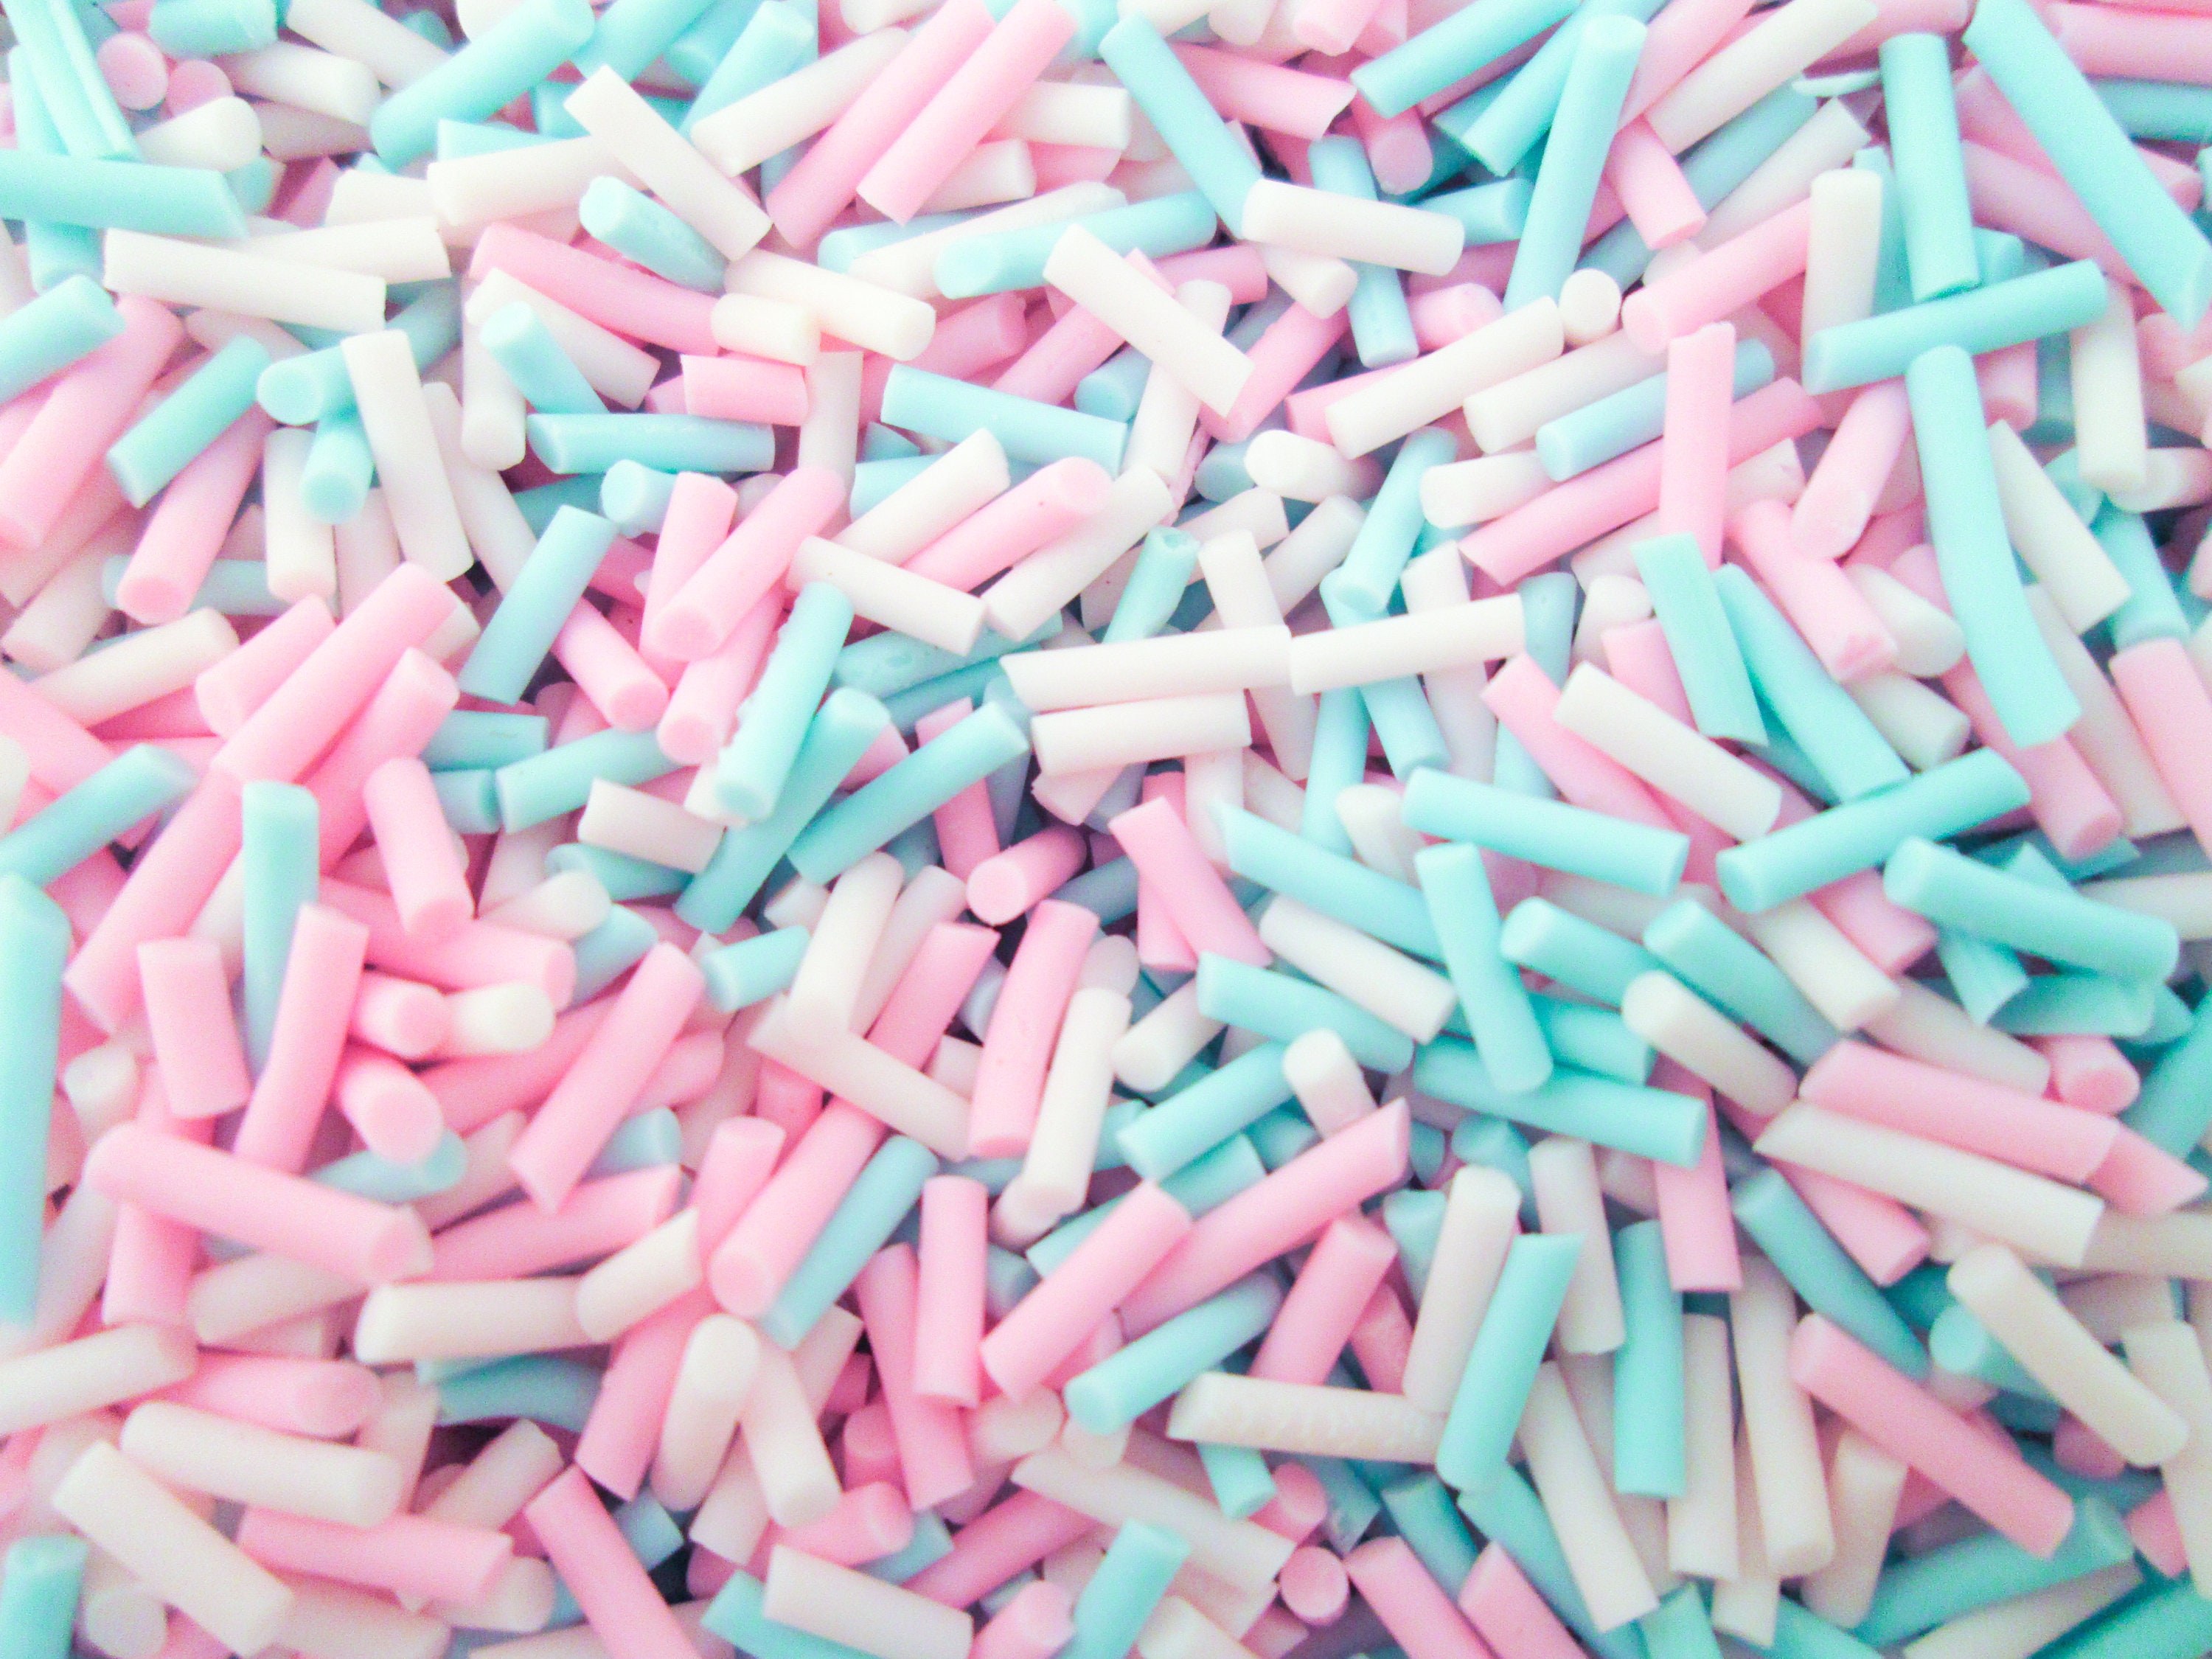 Pastel Polymer Clay Sprinkles Toppings, Colorful Fake Sprinkles, Mini  Rainbow Foam Ball Beads for Slime, Faux Nonpareils, Miniature Bubblegum  Candy